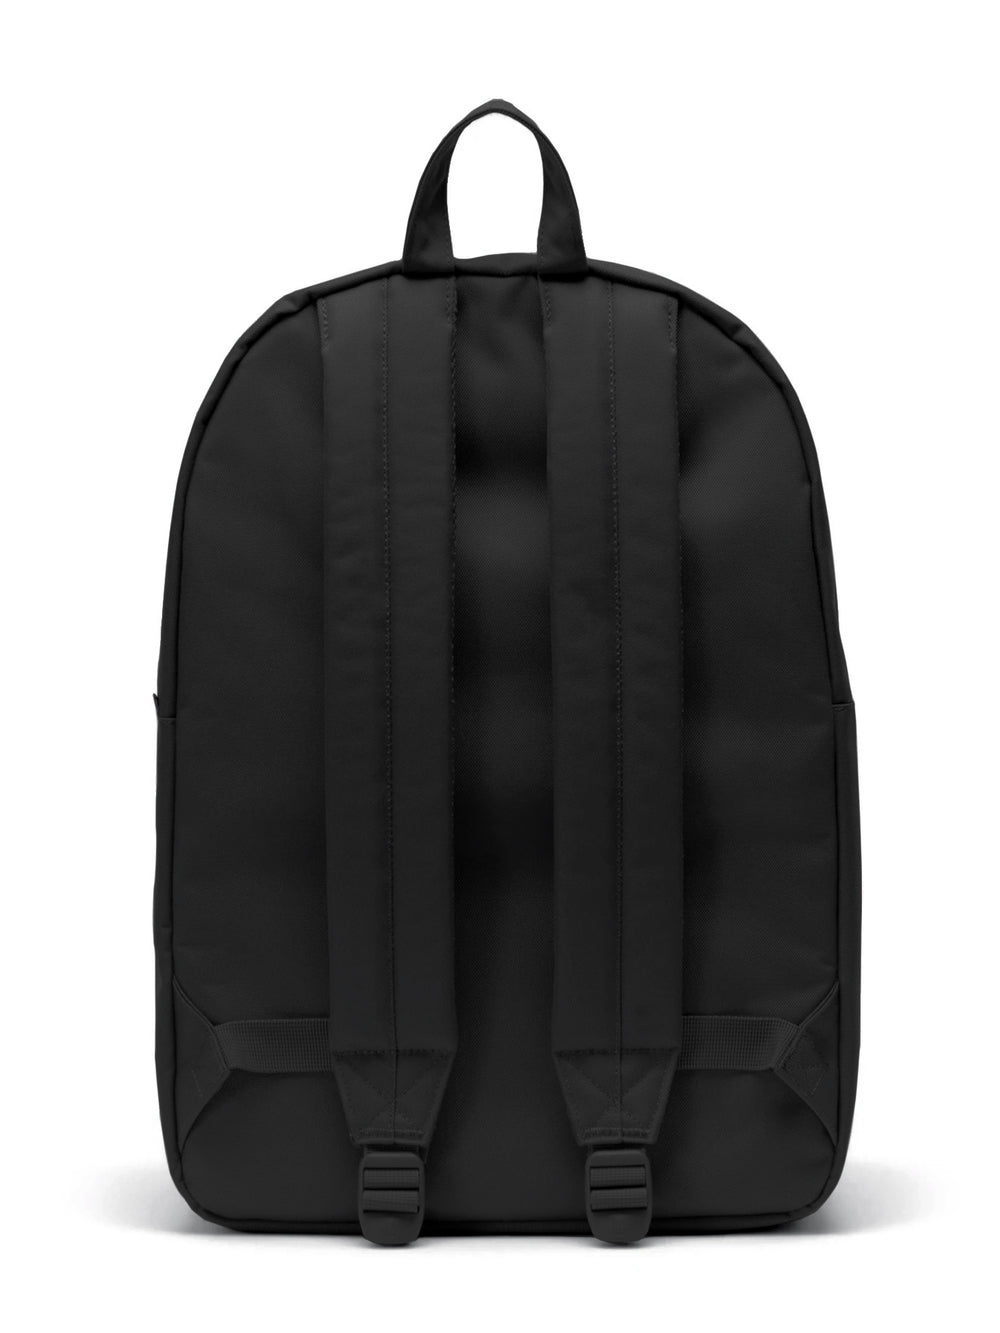 HERSCHEL SUPPLY CO. MIDWAY 25L SMU BACKPACK - BLACK  - CLEARANCE